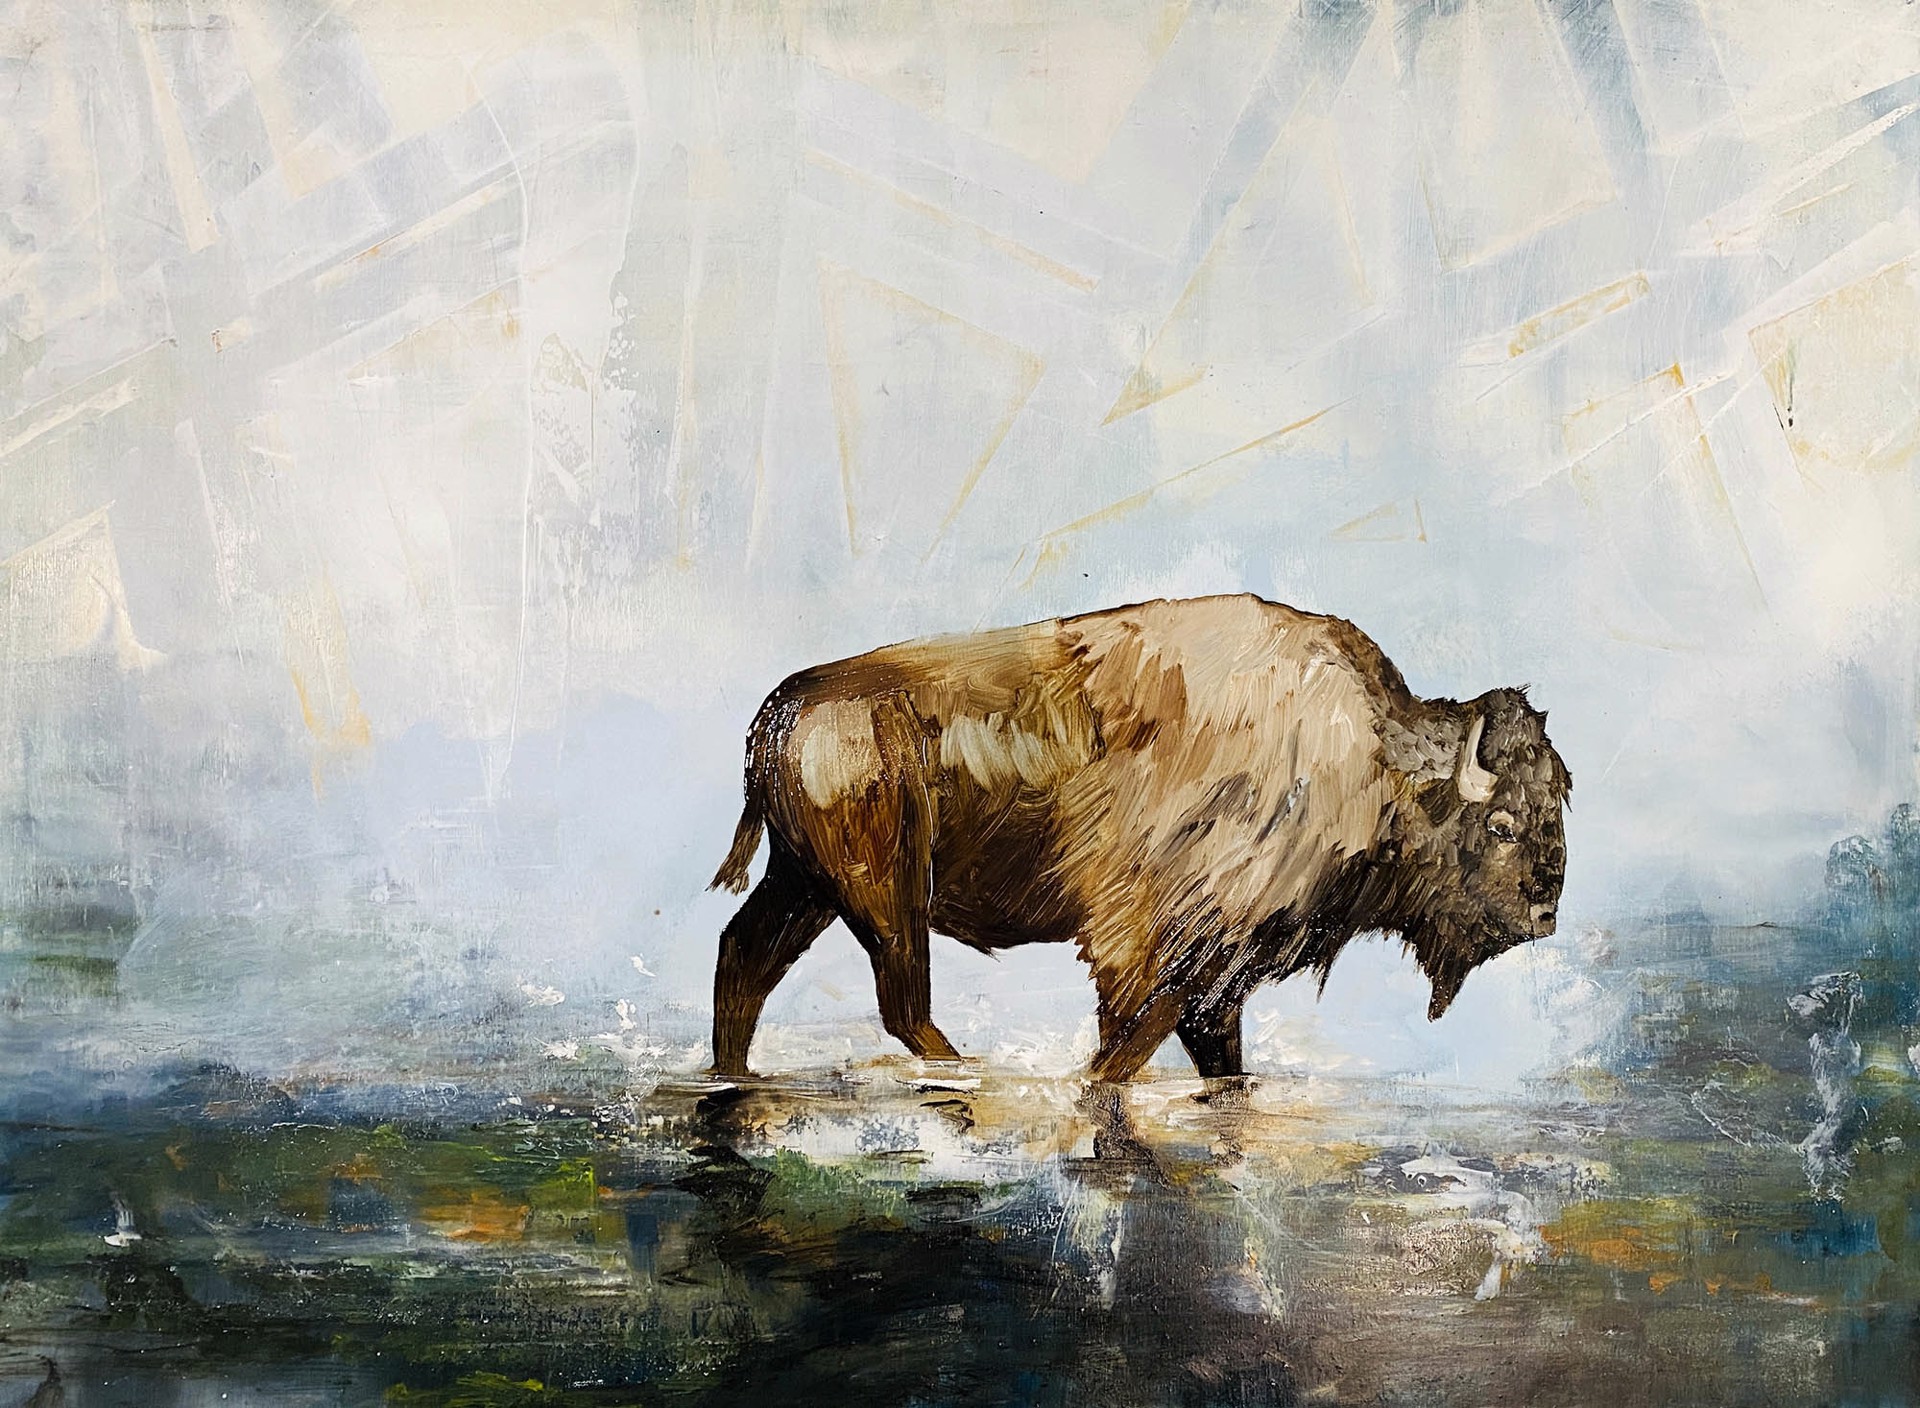 Original Oil Painting Featuring A Walking Bison Over Water